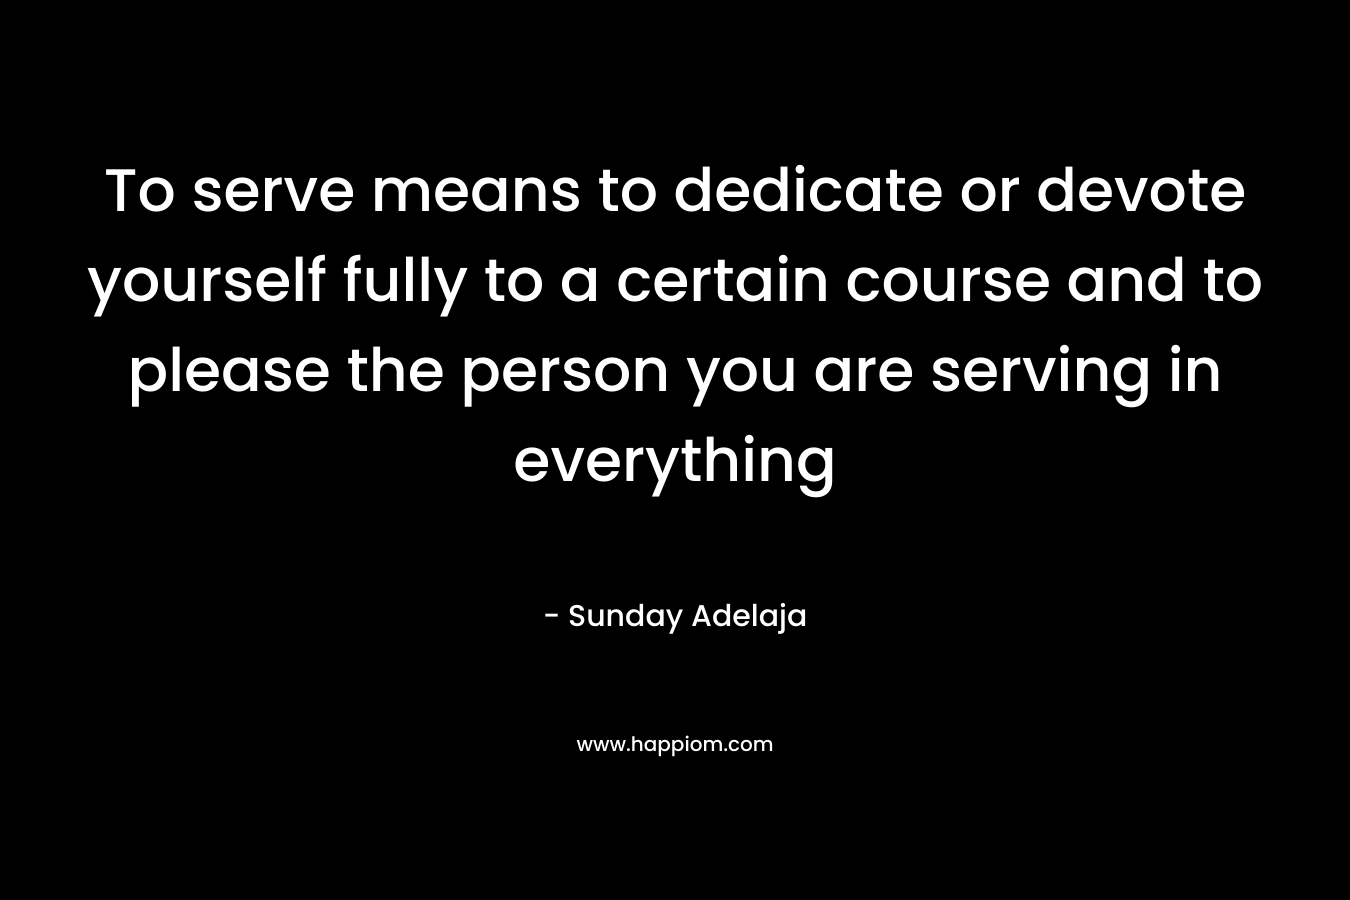 To serve means to dedicate or devote yourself fully to a certain course and to please the person you are serving in everything